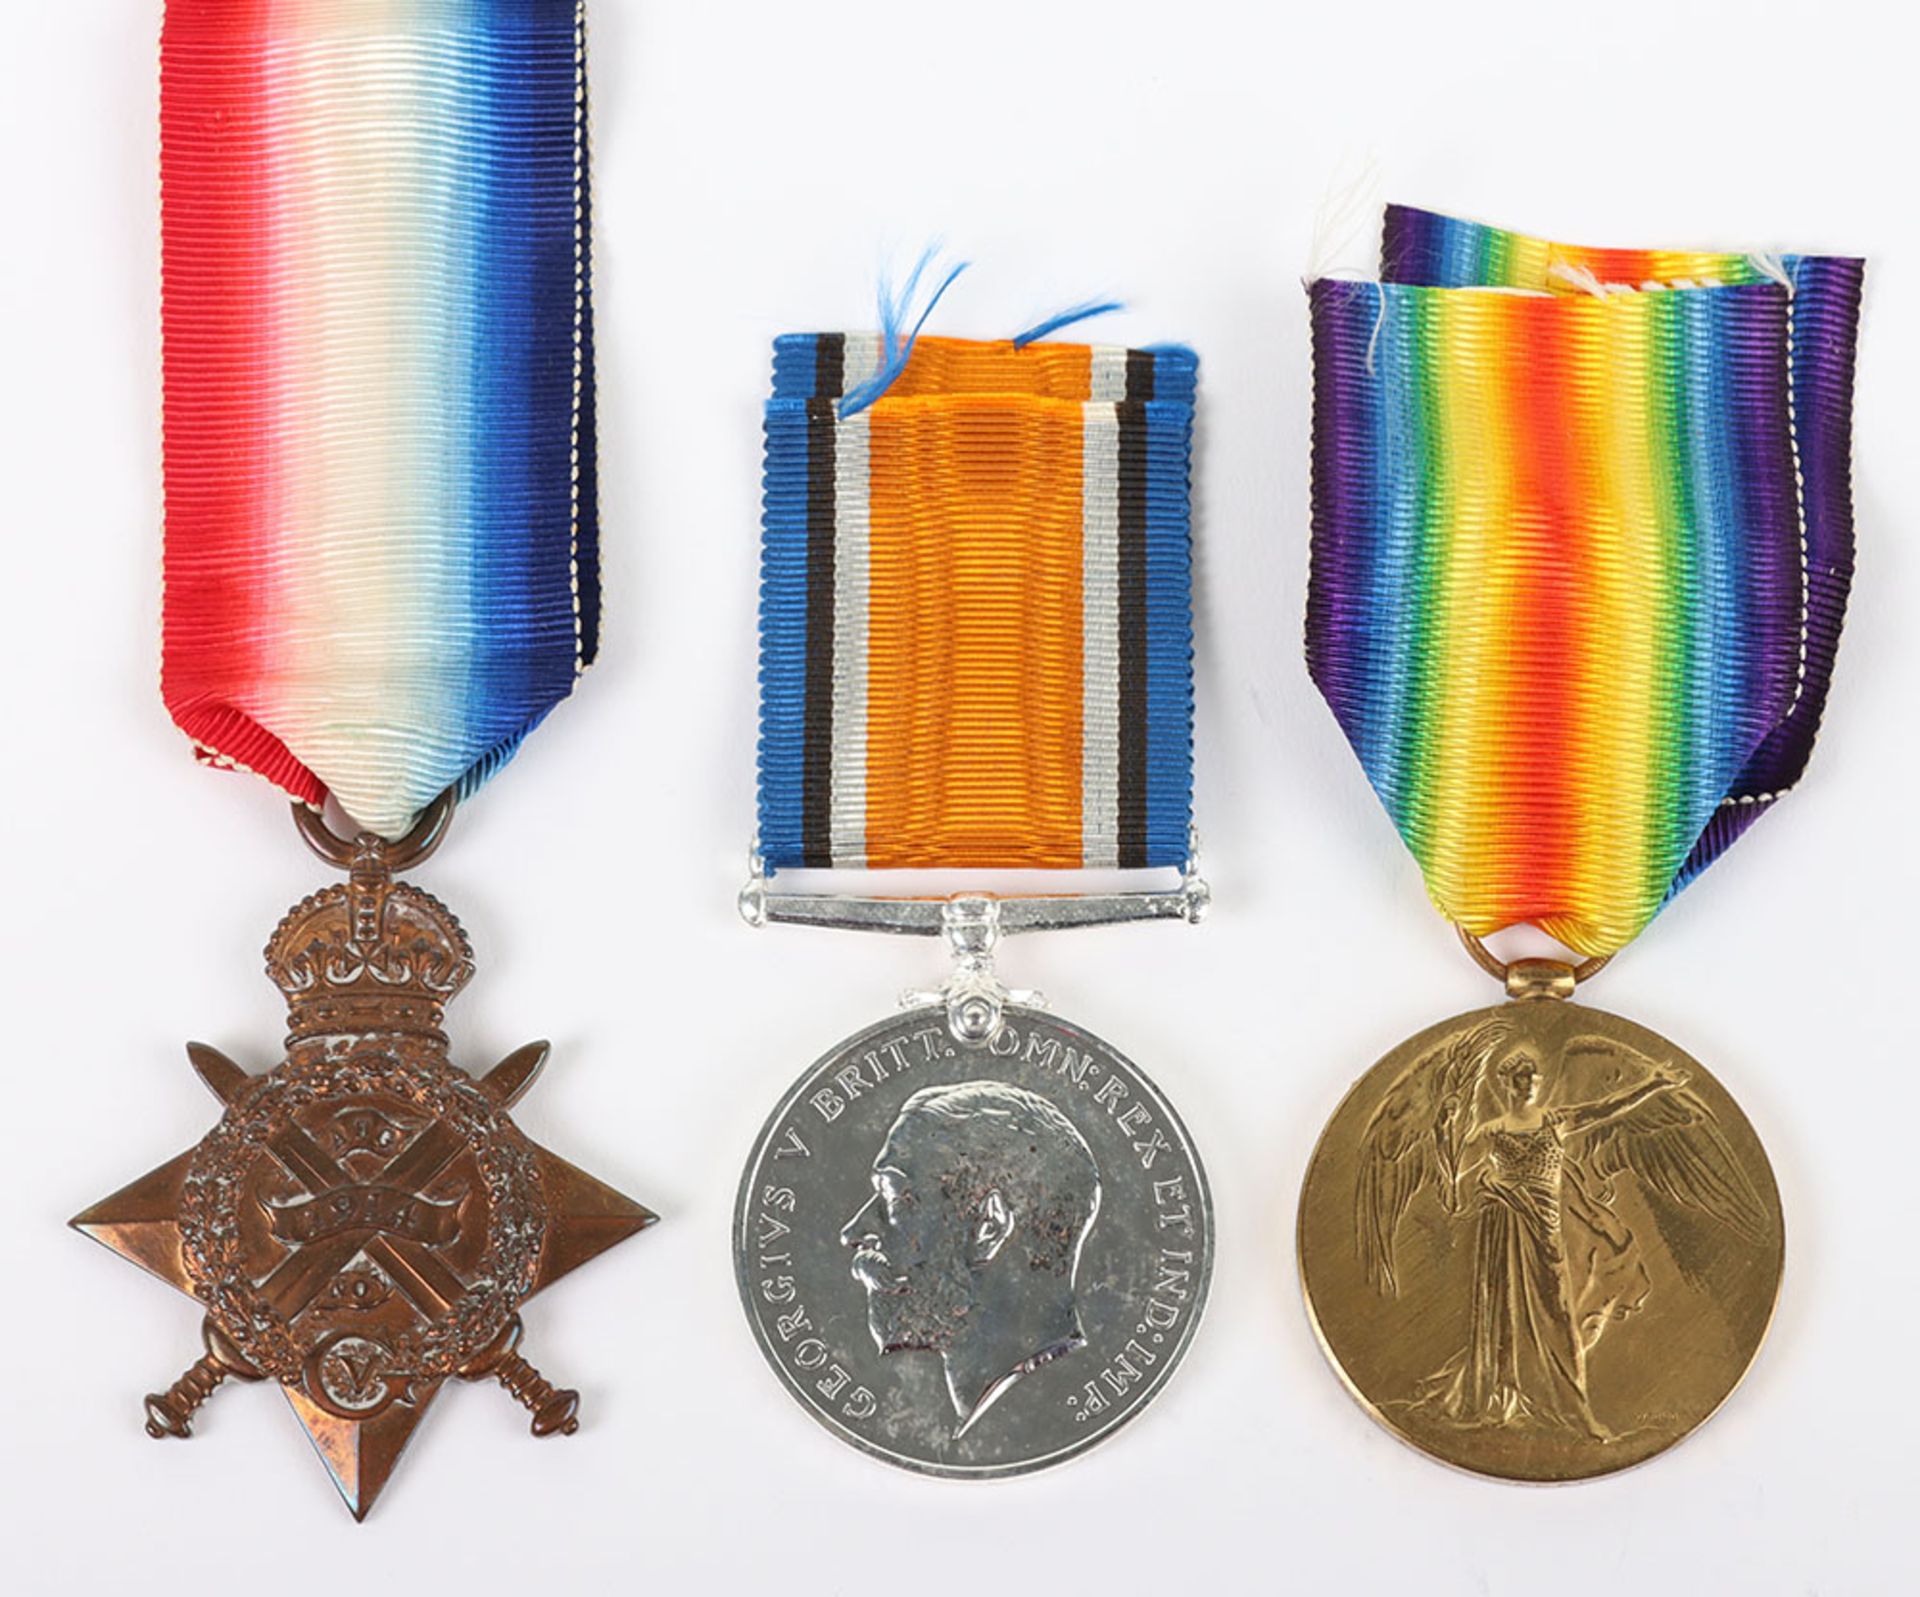 A 1914 star trio of medals to a private in the Royal Army Medical Corps who was awarded the Military